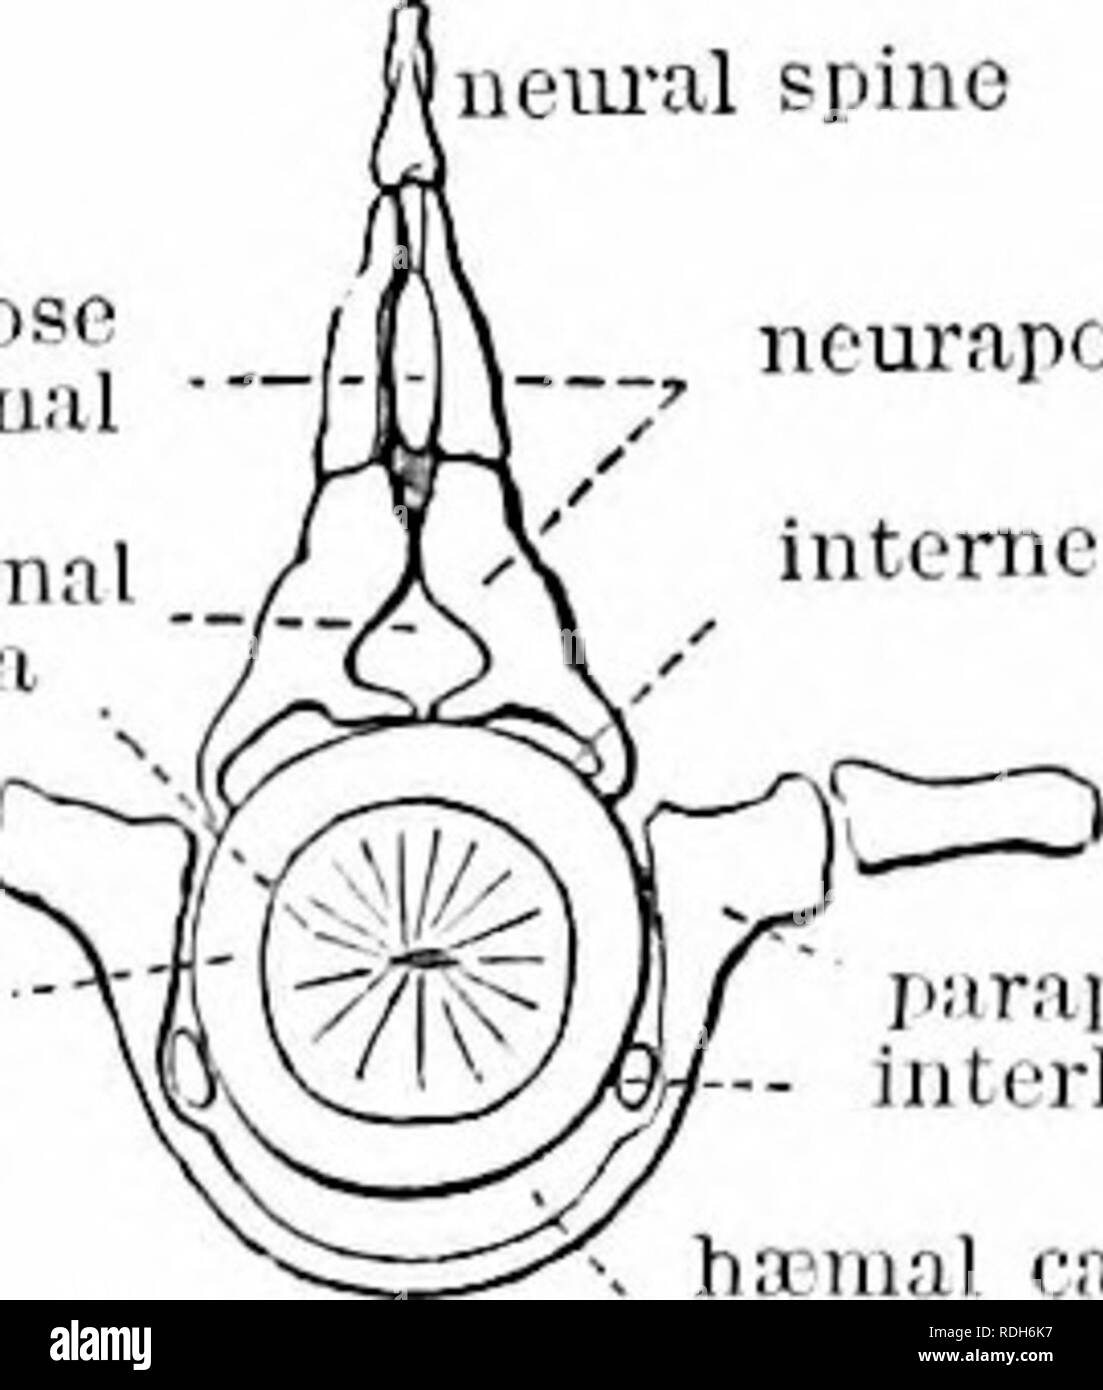 . On the anatomy of vertebrates. Vertebrates; Anatomy, Comparative; 1866. fibro-aiiliroso CMual neural canal gclatlniius chorda c=a( inner l-iyei&quot; I'f niiruUH capsule as hyaline cartilage. ncurapopnysis internenral cartilage plcurapopliysis j&gt;arainipliysis iiiterliLeraal cartiiag hanial canal Abjonlina! vertebra, Sturgemi Fore part ef skeleton. Lamprey trdwmiizon) and neural spines. The part of the neurapophysis Ijounding the true neural canal is usually distinct from that l^ounding the fat- filled fissure aljove. The parapophyses are united by a con- tinuous phvtc of cartilage forming Stock Photo